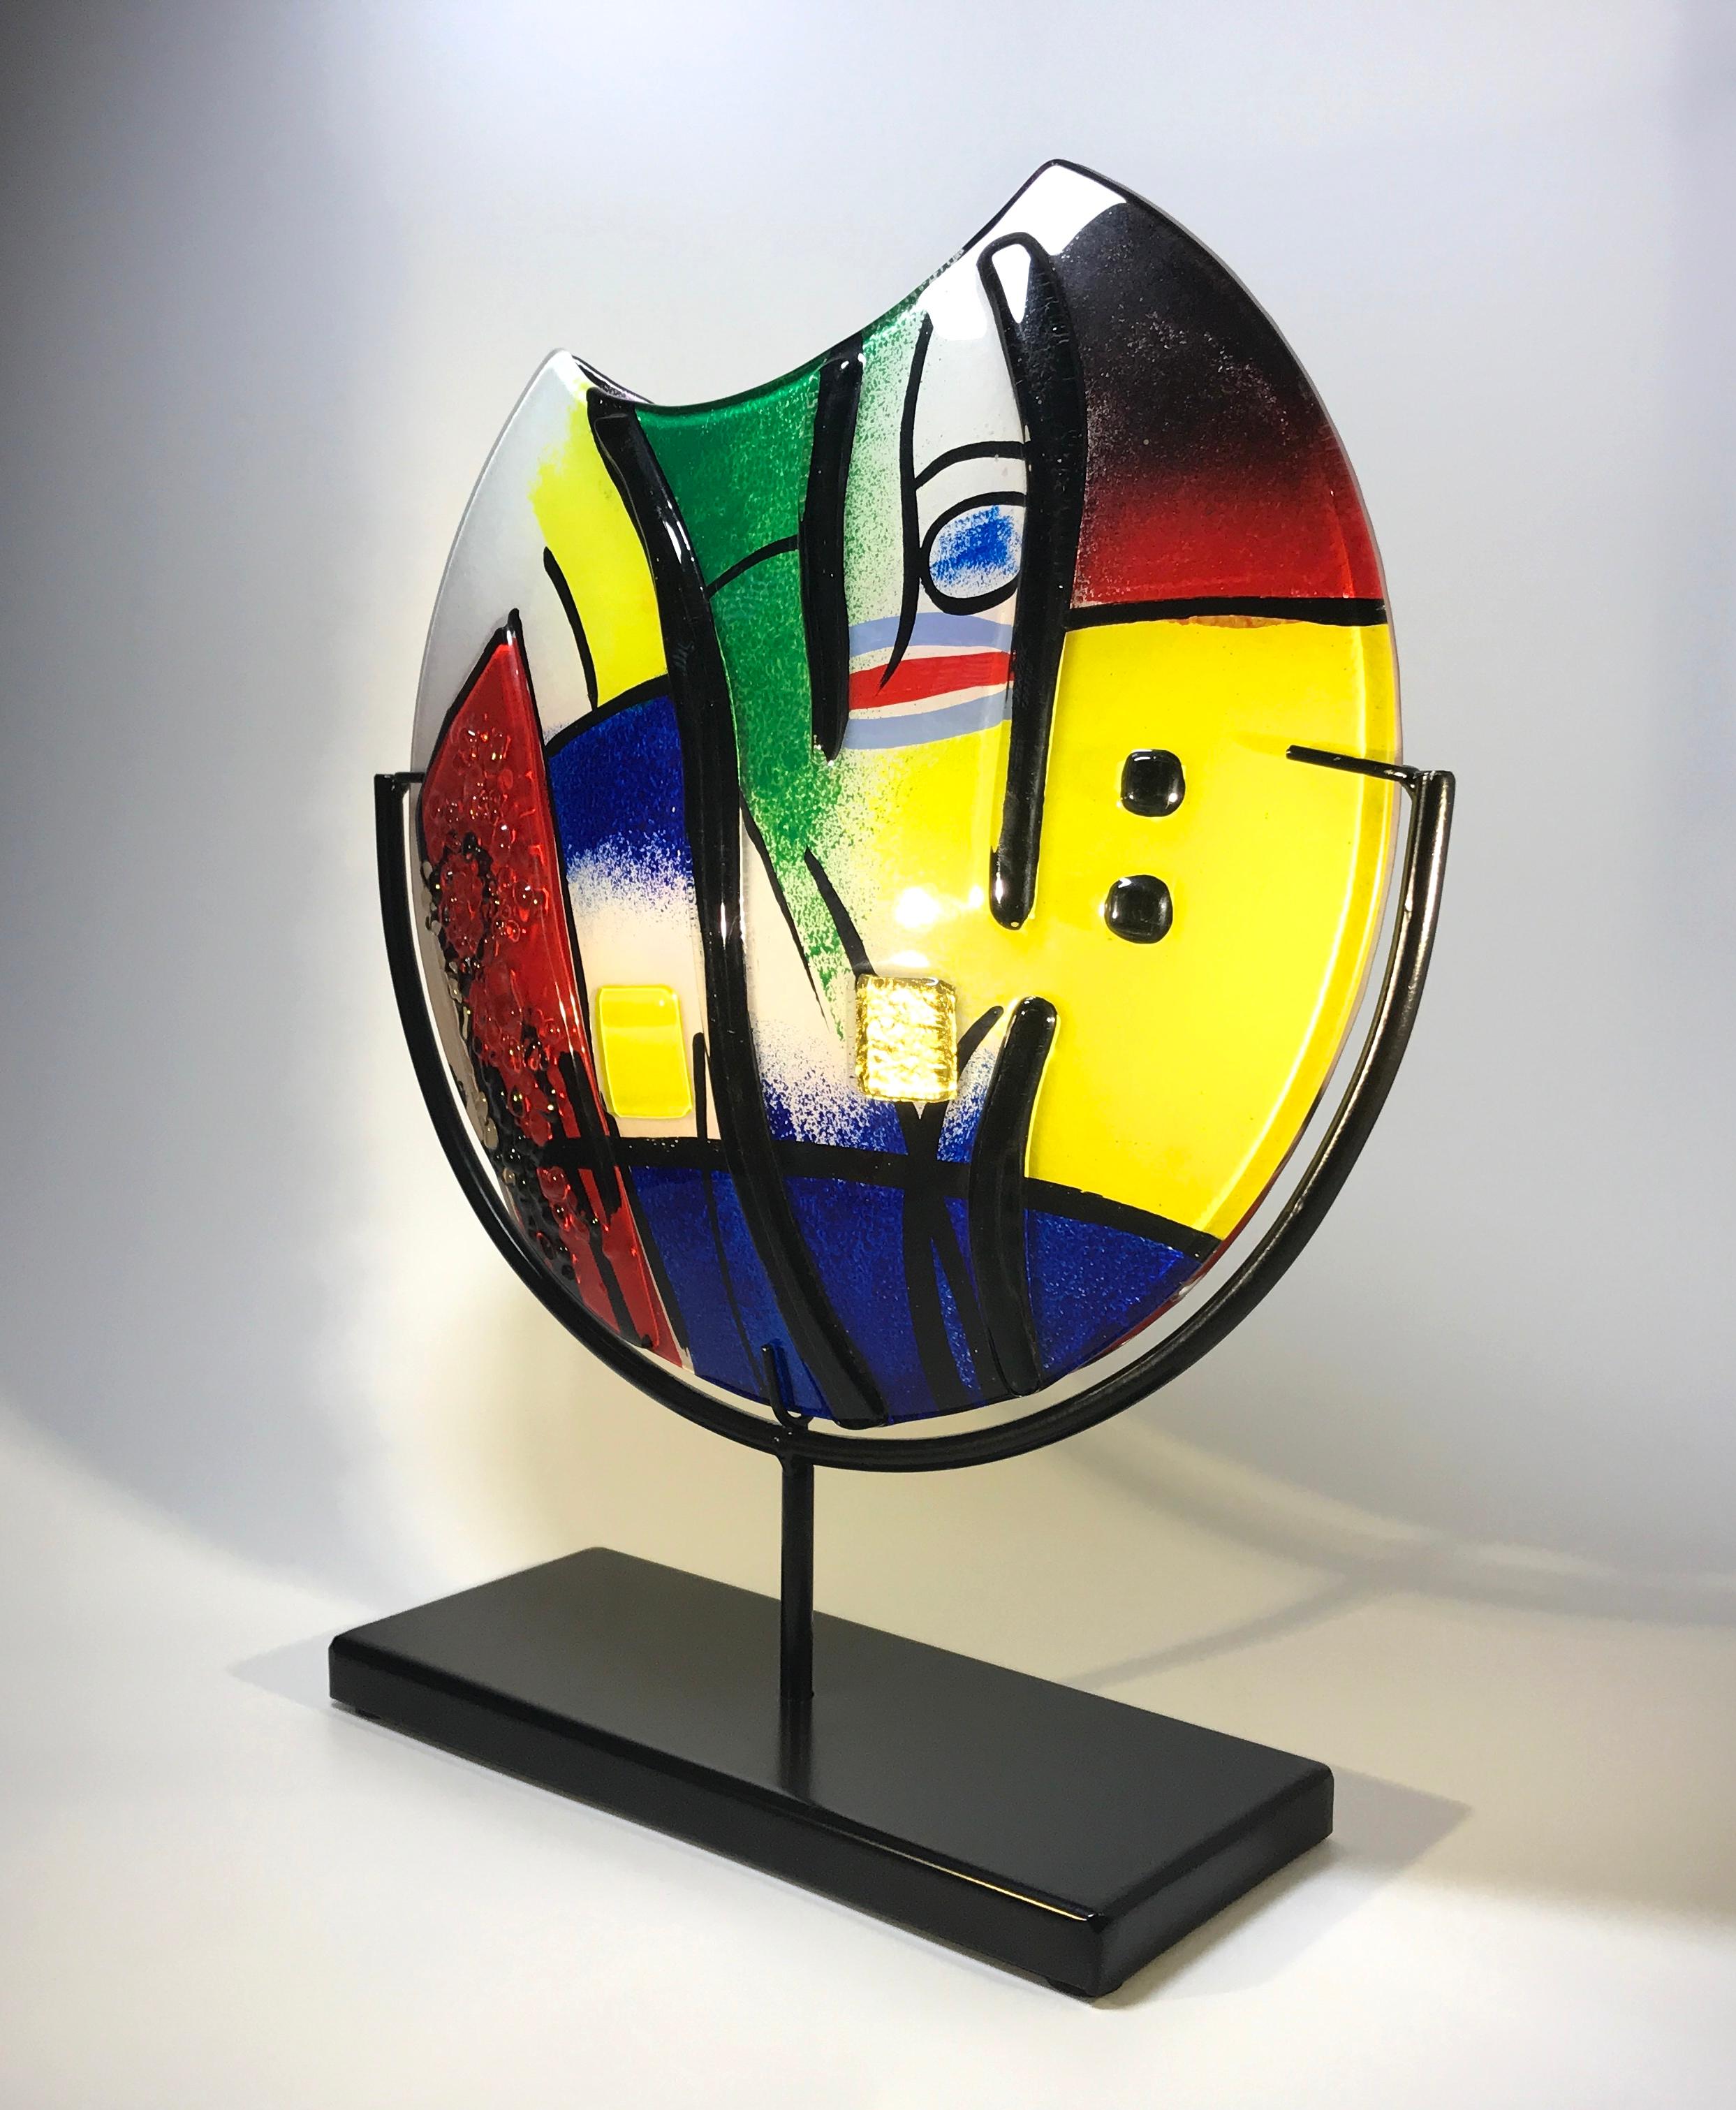 Distinct and stylish fused glass Italian vase, inspired by the master of Modern Art, Pablo Picasso
An impressive piece mounted on an oblong black metal stand,
circa early 21st century
Measures: Height 15 inch, width 12.5 inch, depth 4 inch
In